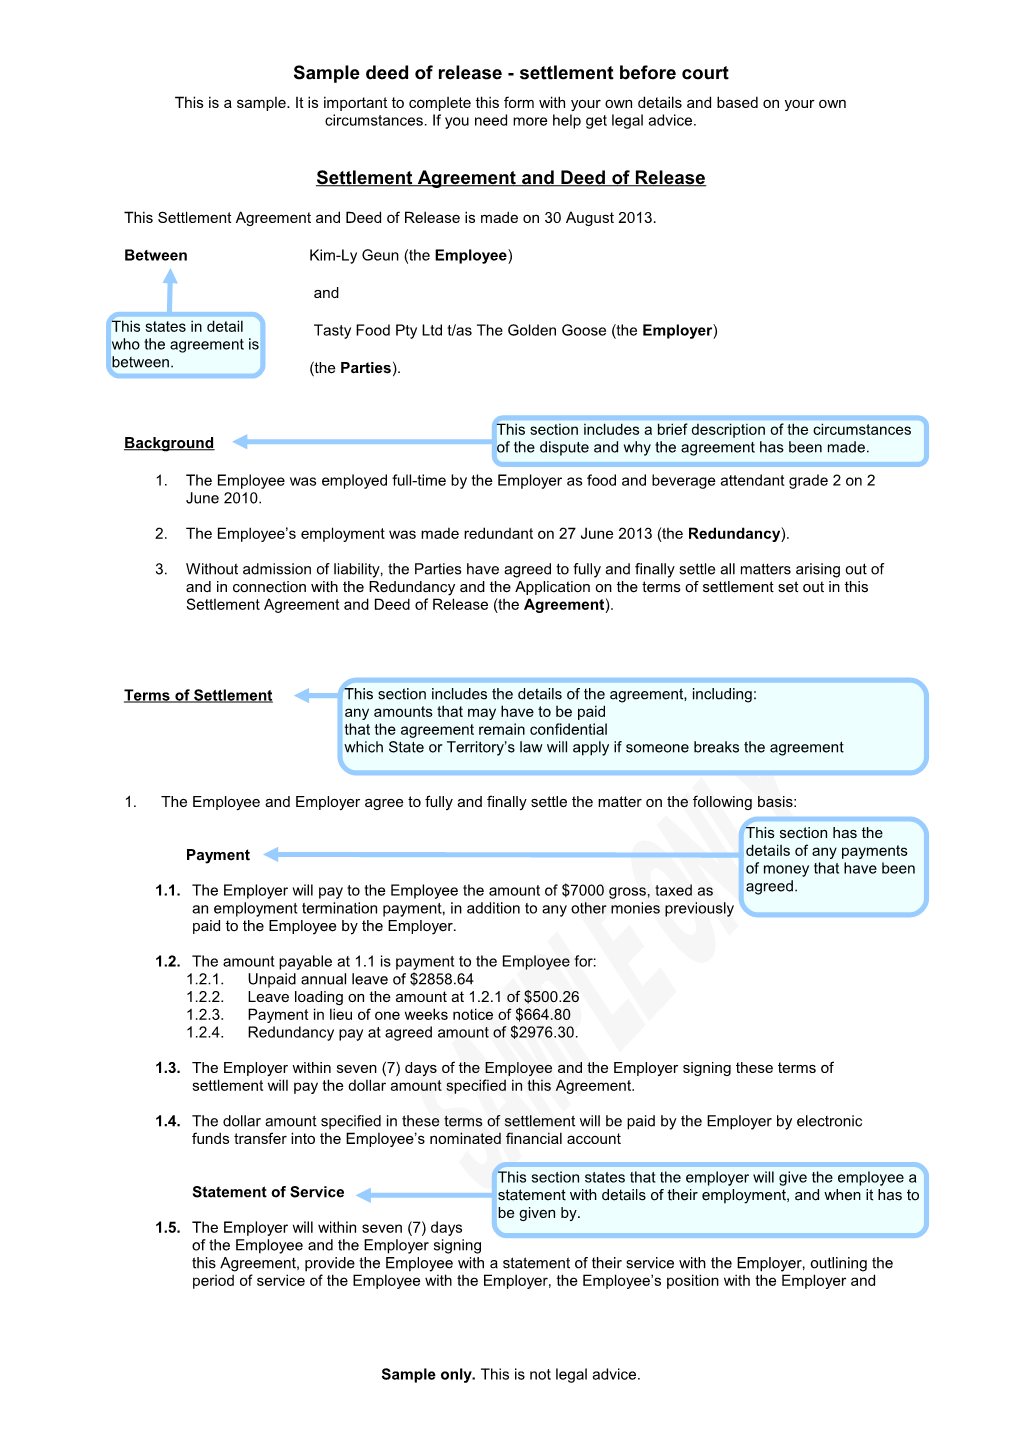 Settlement Agreement and Deed of Release